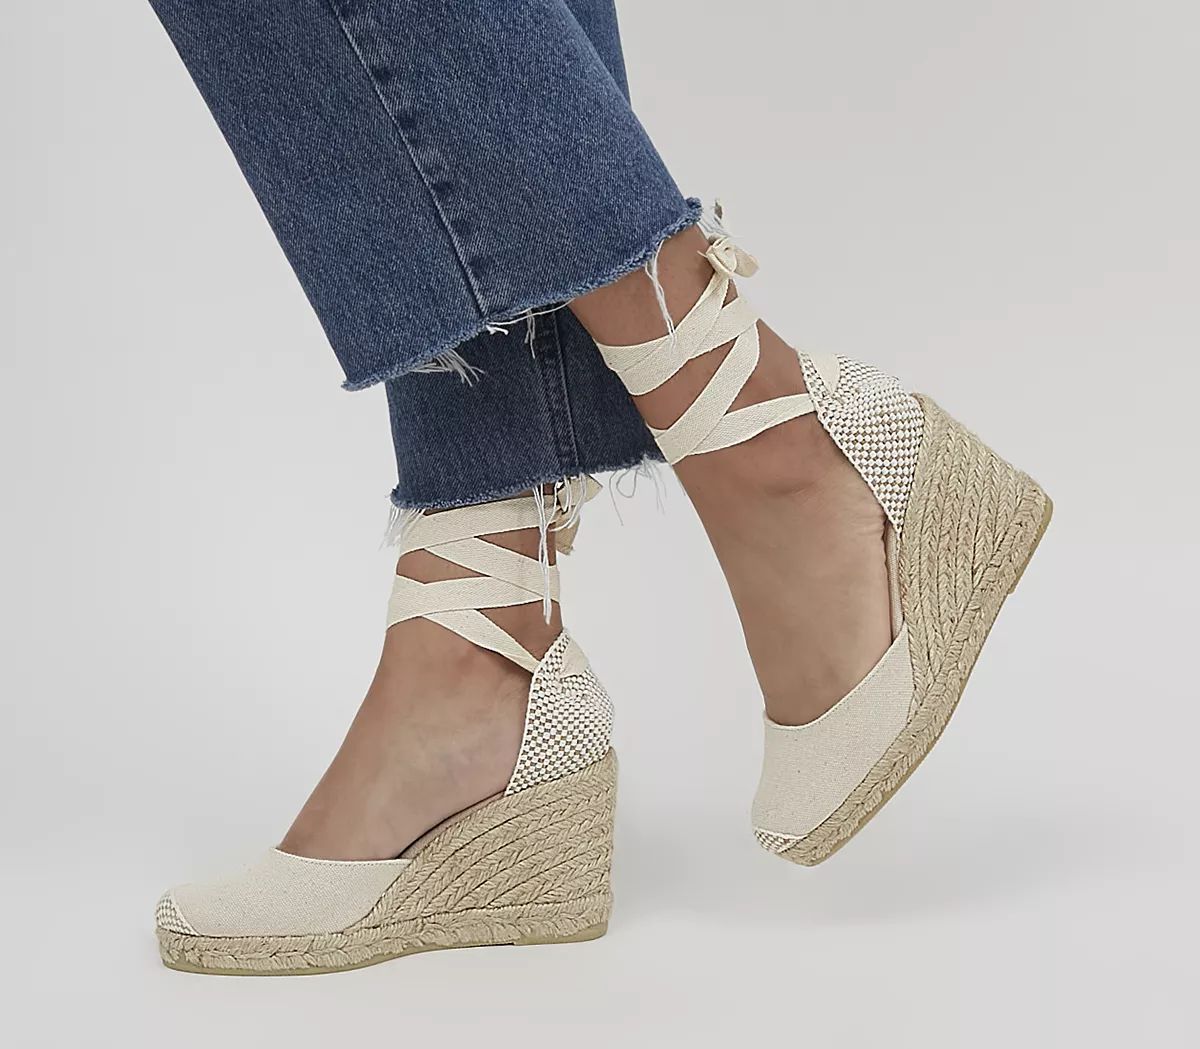 OFFICE
								Marmalade Ankle Tie Espadrille Mid Heel Wedges
								Natural Canvas | OFFICE London (UK)